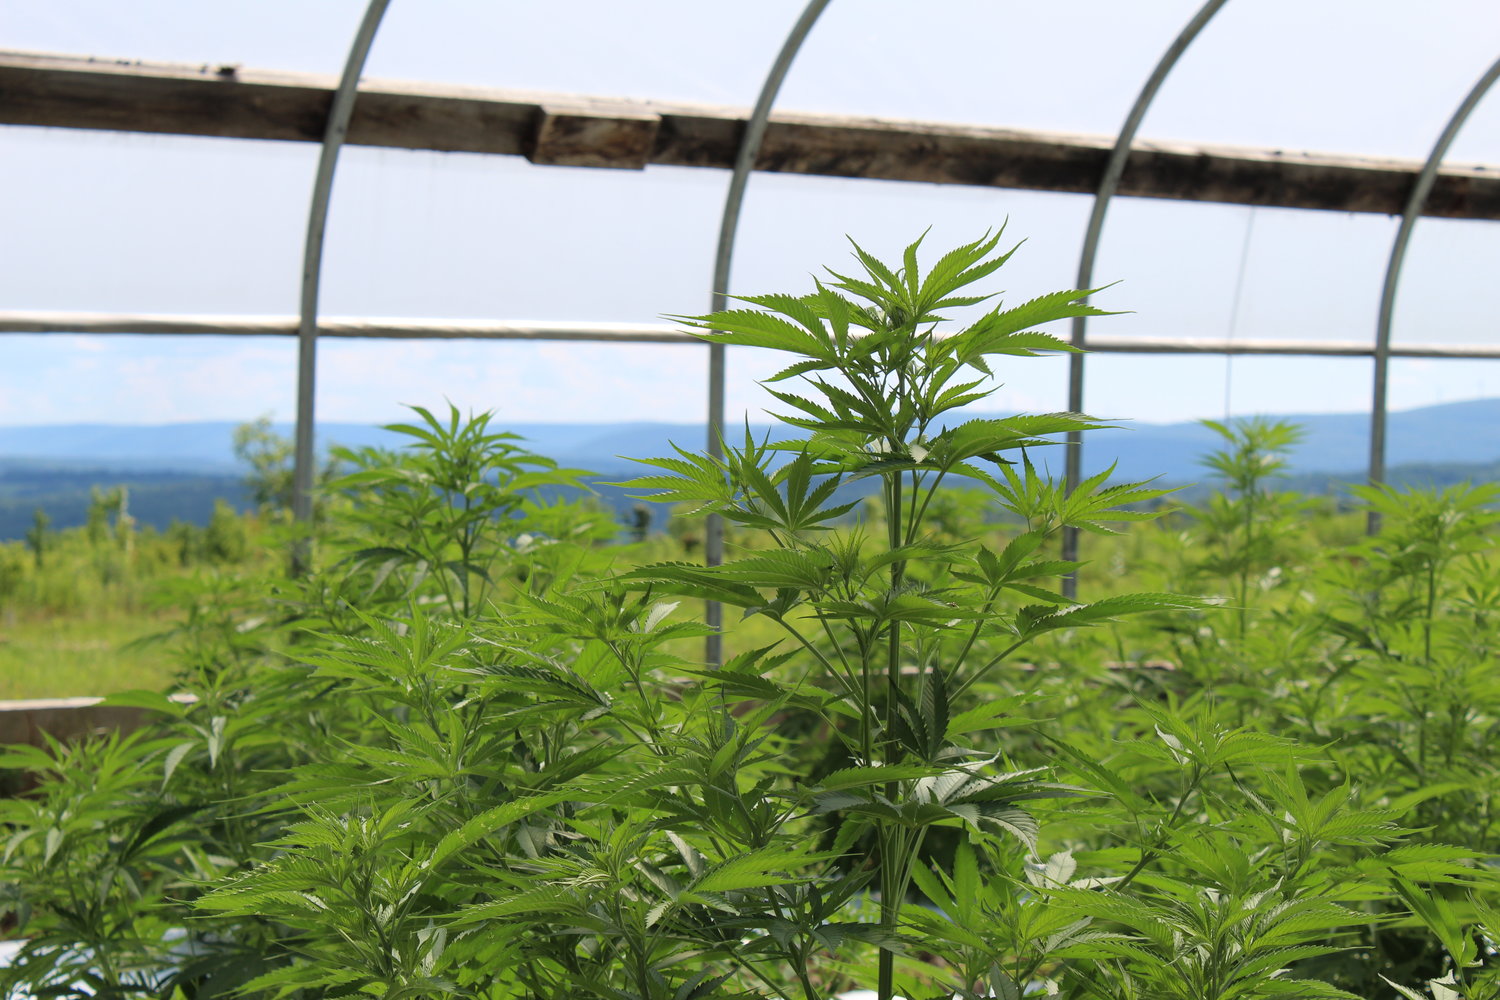 A hemp plant in the high tunnel at Anthill Farm.